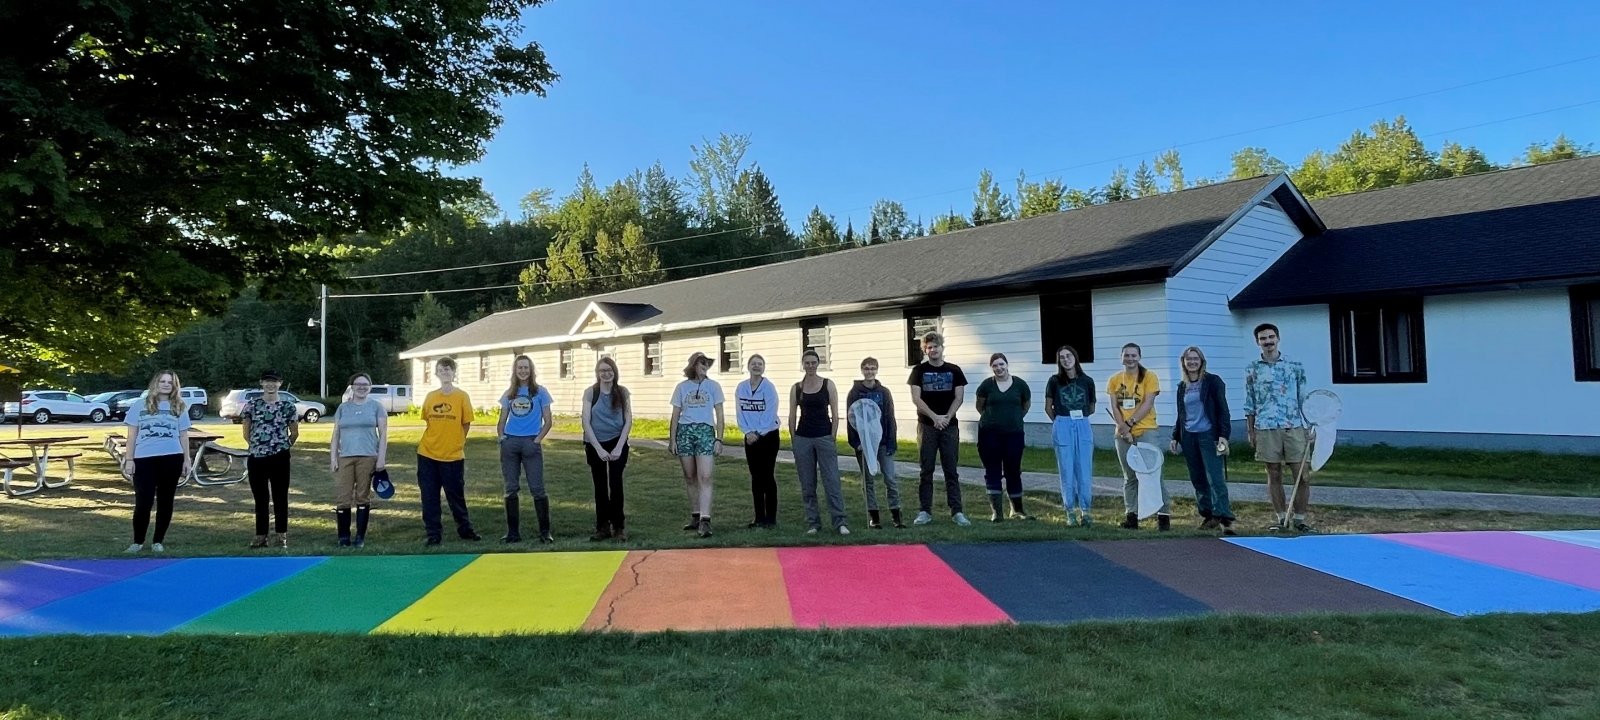 Students standing behind a progress pride flag painted on a sidewalk at the Ford Center.